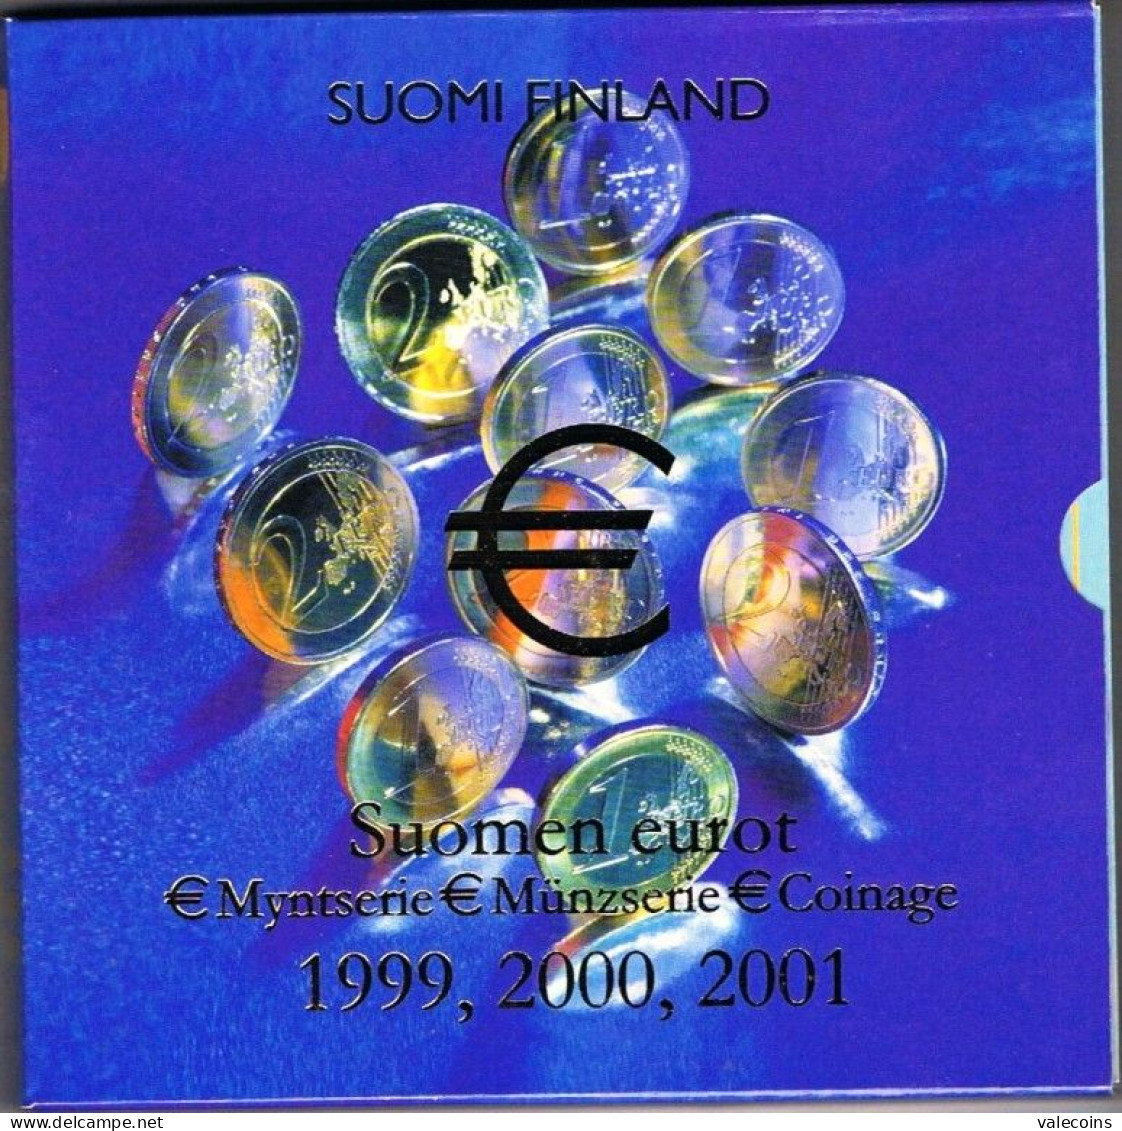 FINLANDIA SUOMI FINLAND FINNLAND - 24 COINS - KMS OFFICIAL ISSUE 1999-2000-2001 YEAR SET - LIMITED ISSUE - Finnland